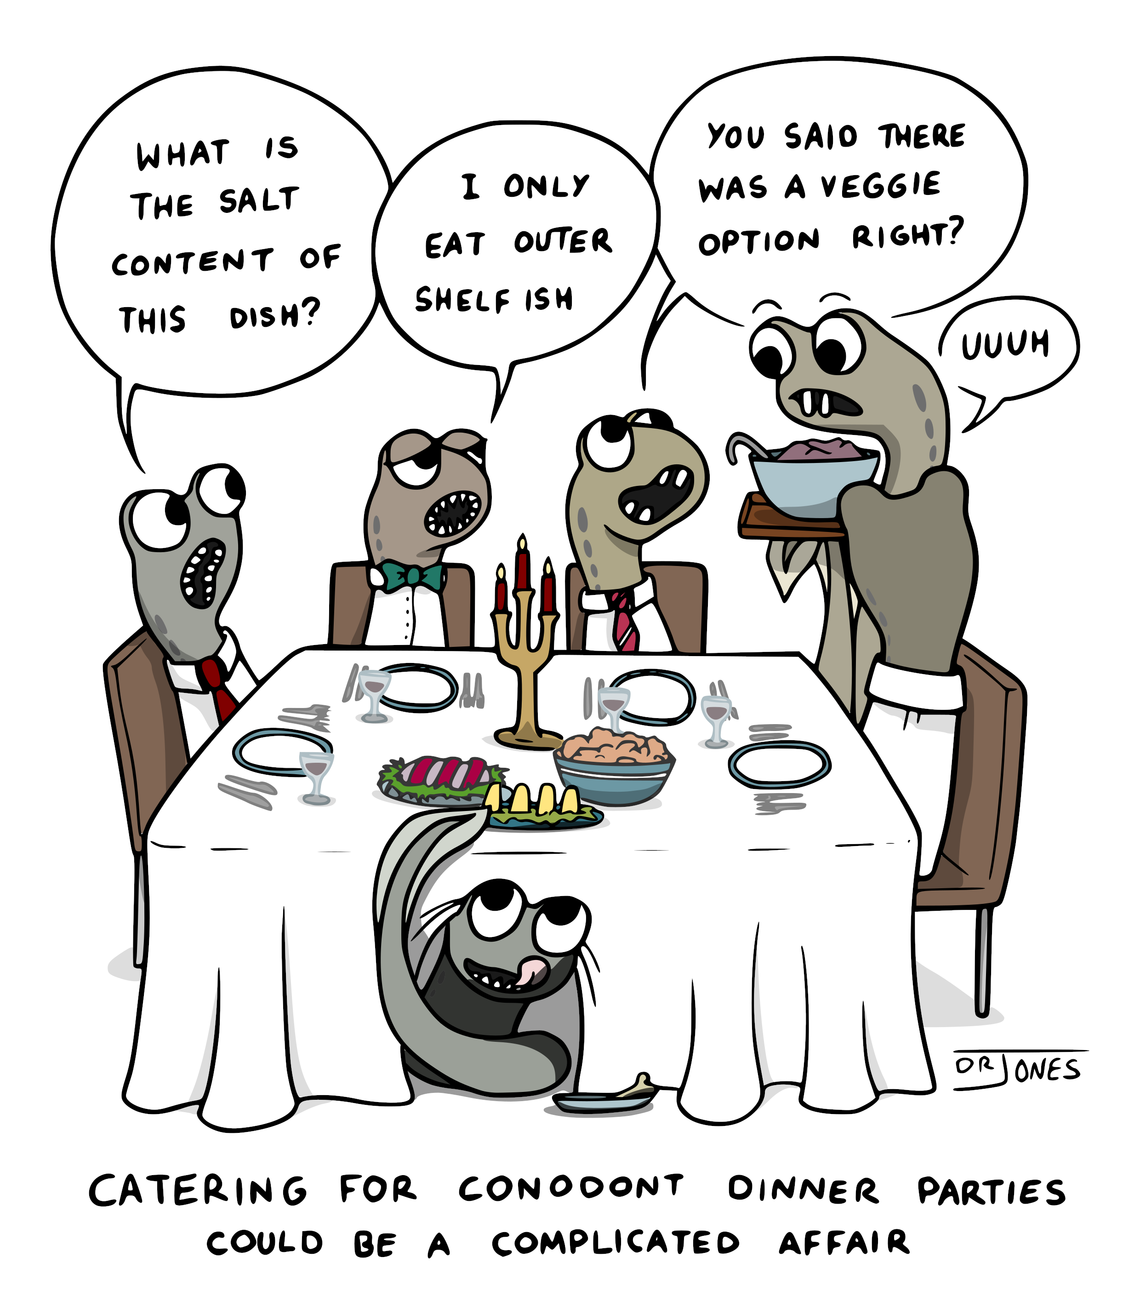 Conodont dinner party